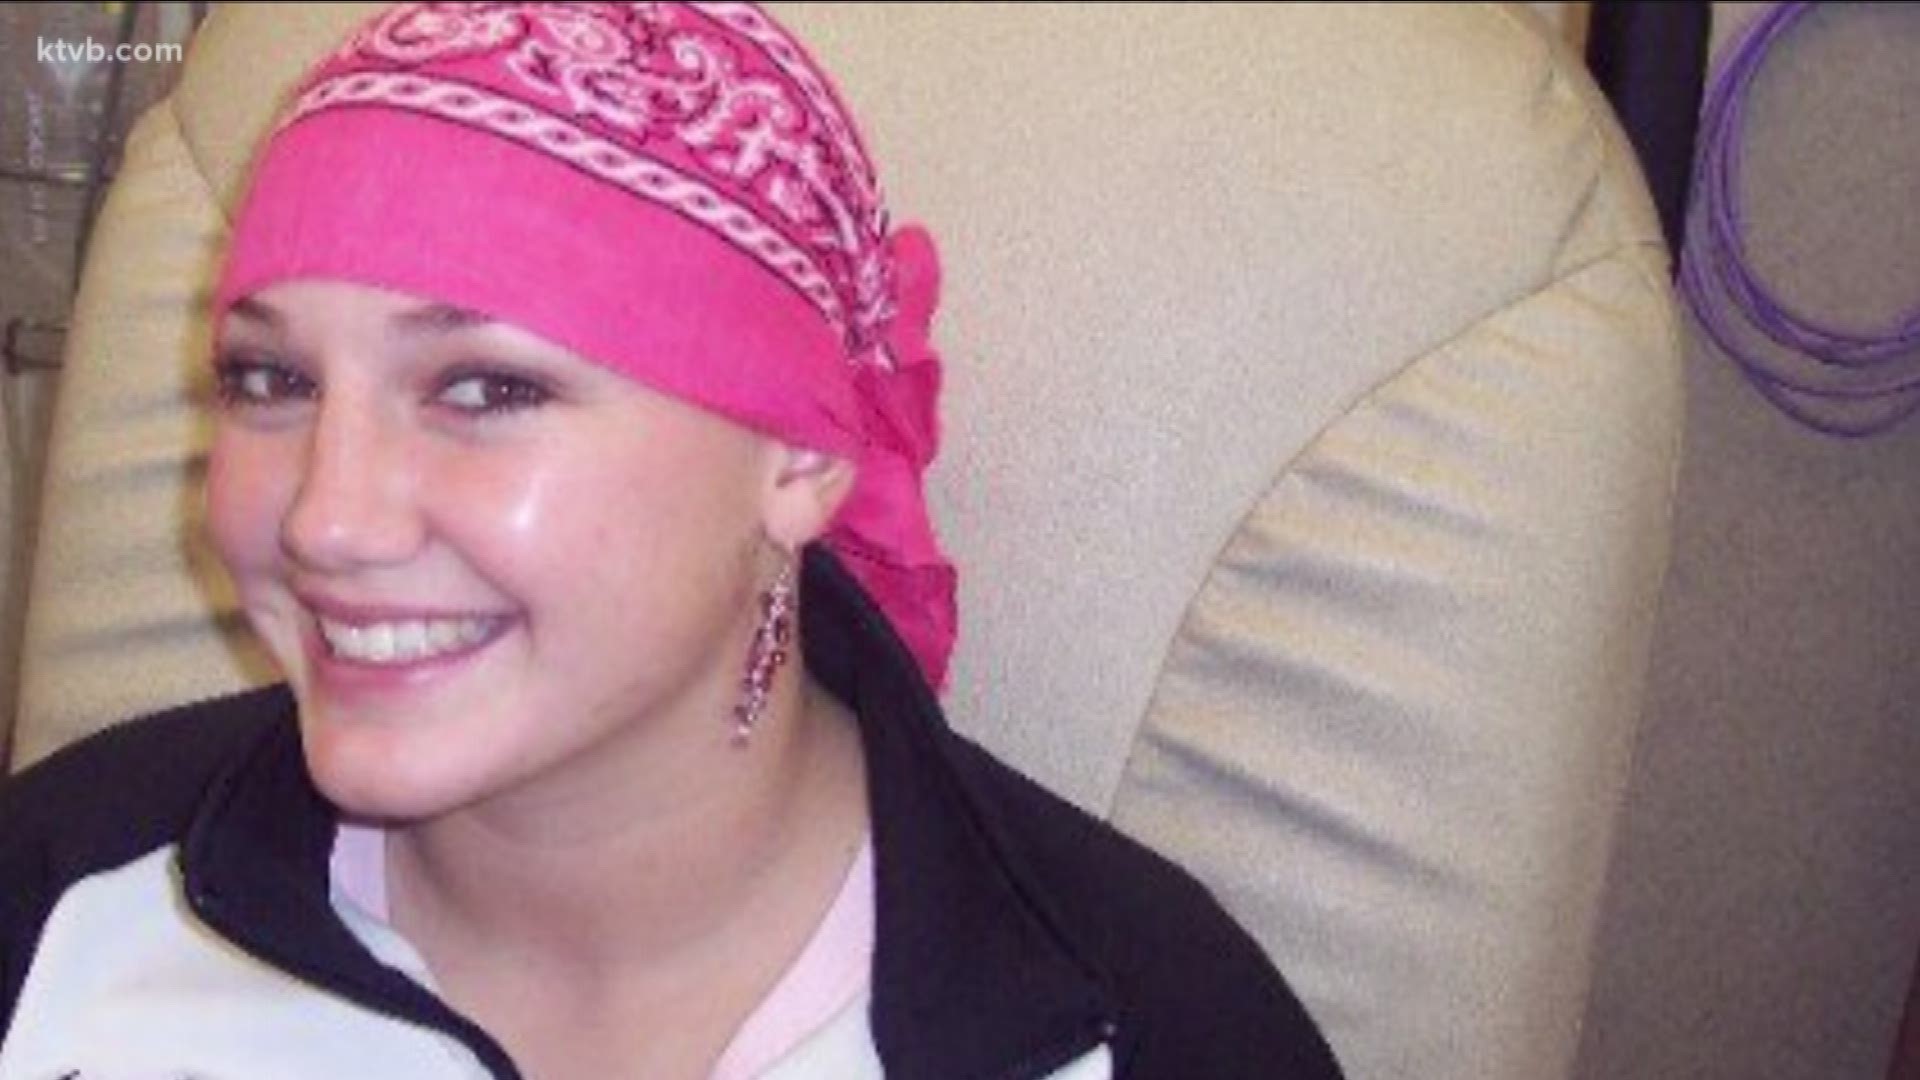 When Amy Rhoades was diagnosed with breast cancer at age 20, she found strong support from family and friends. And now she is helping others who are battling challenging medical issues. 